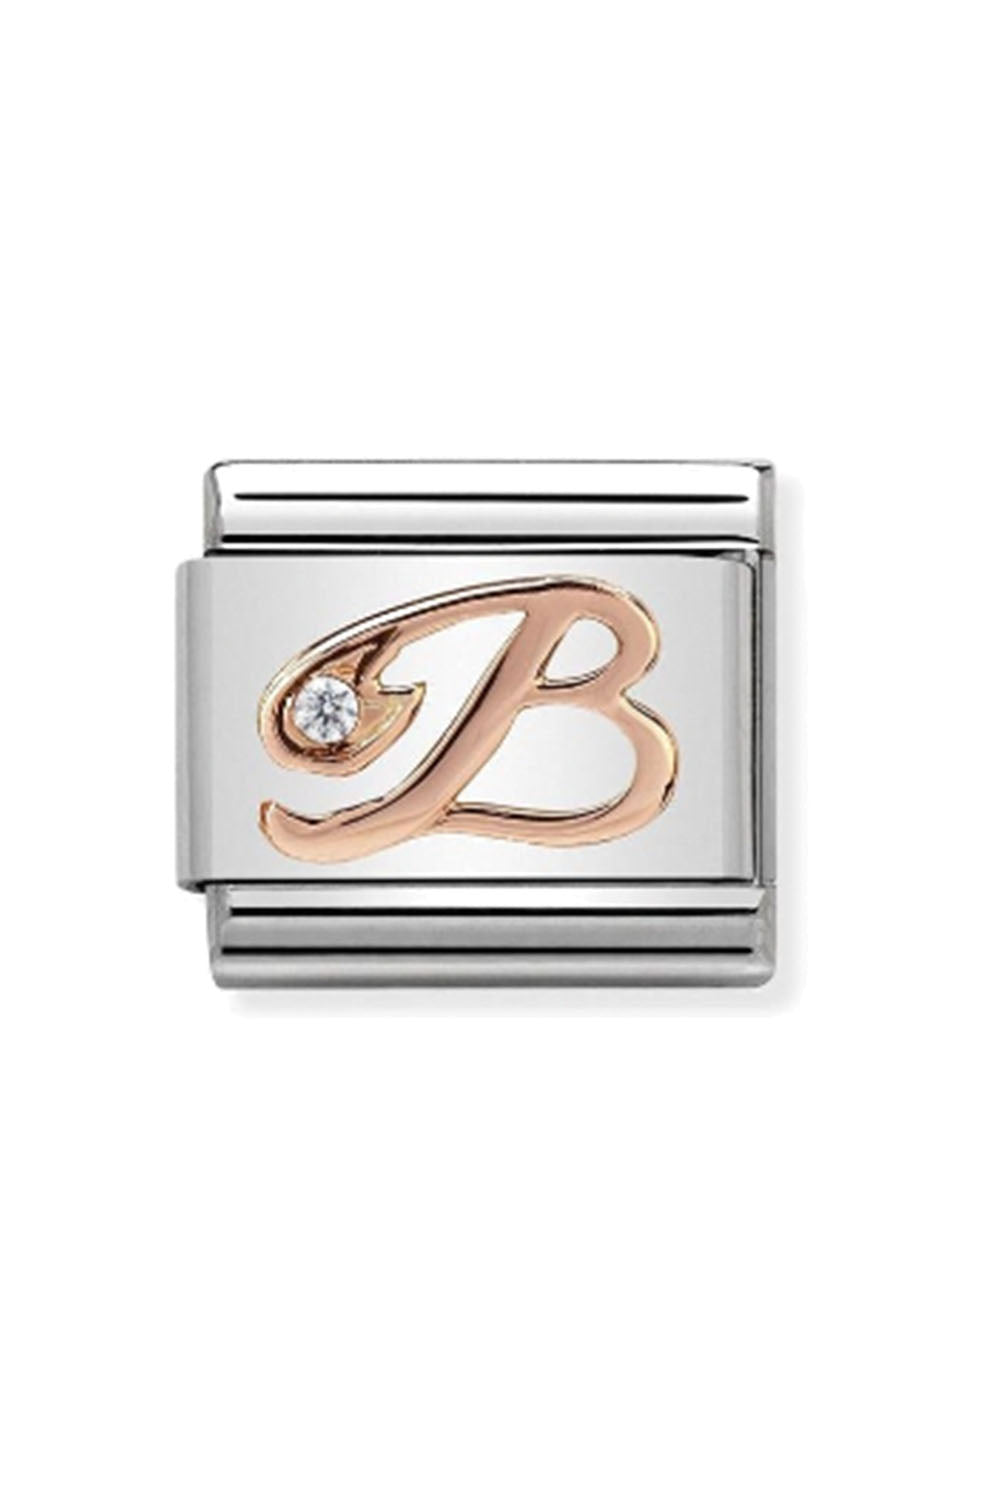 LETTERS 9k rose gold and CZ B